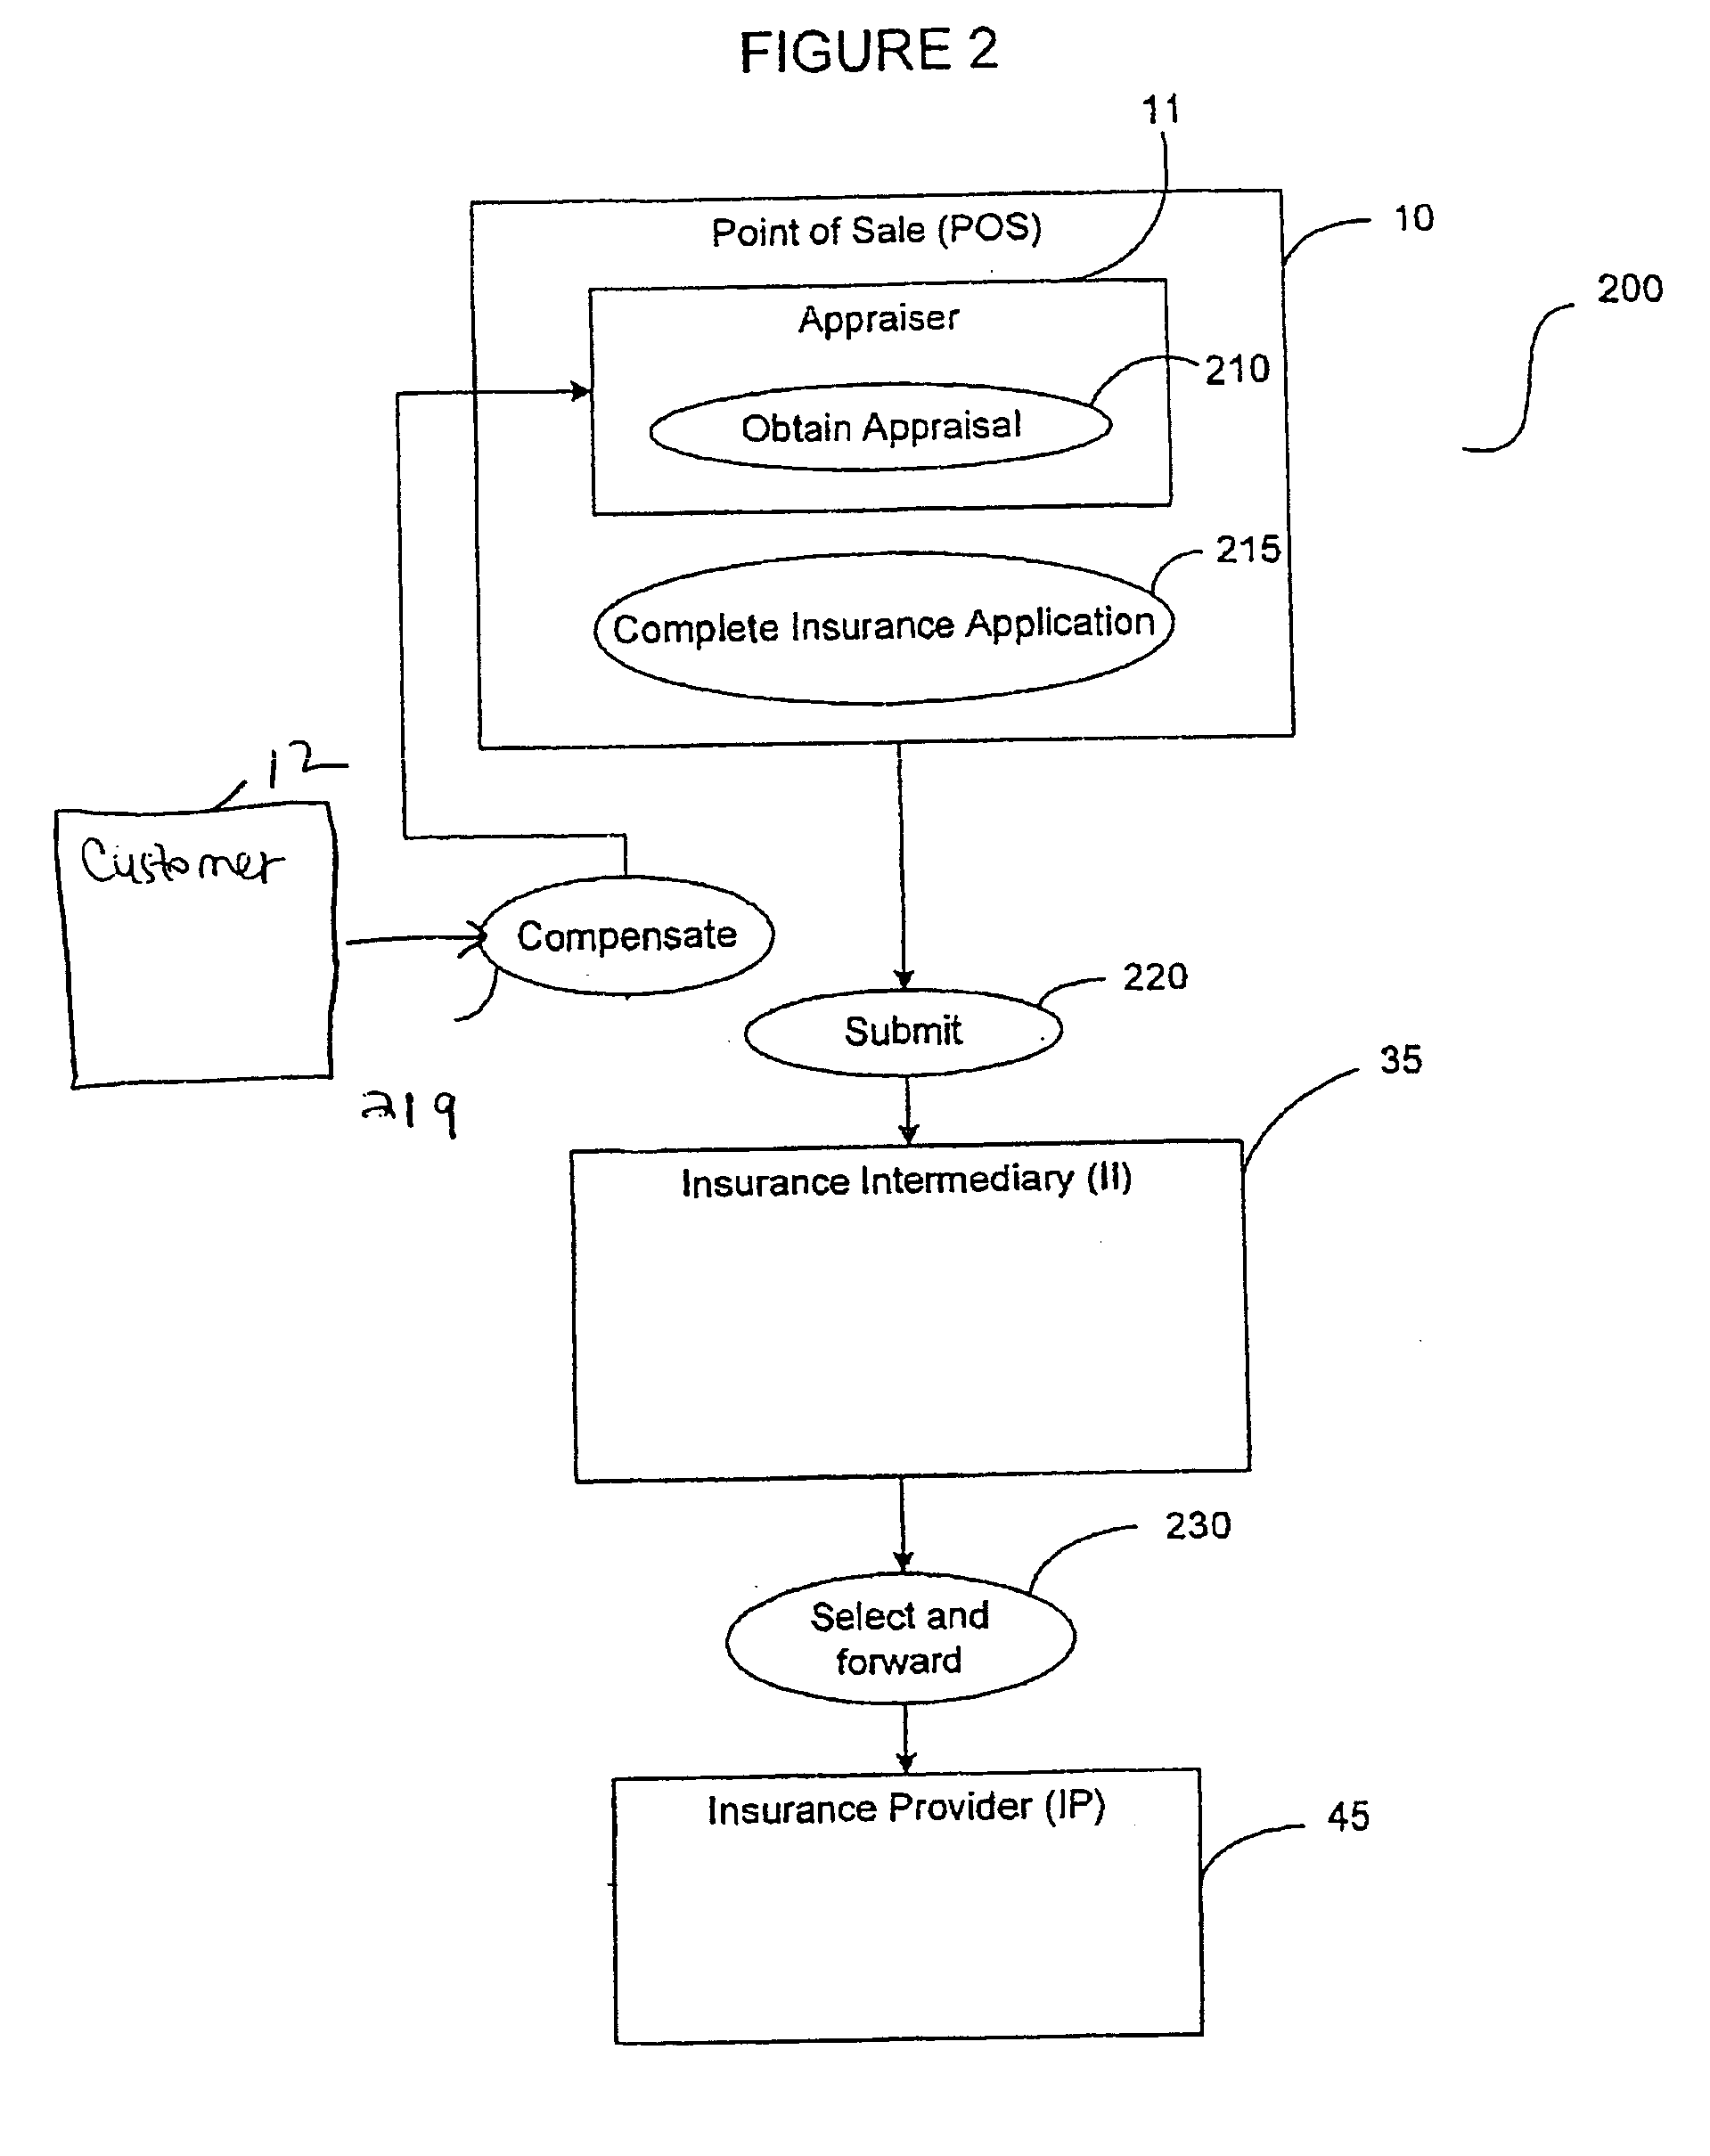 System and method for applying for insurance at a point of sale